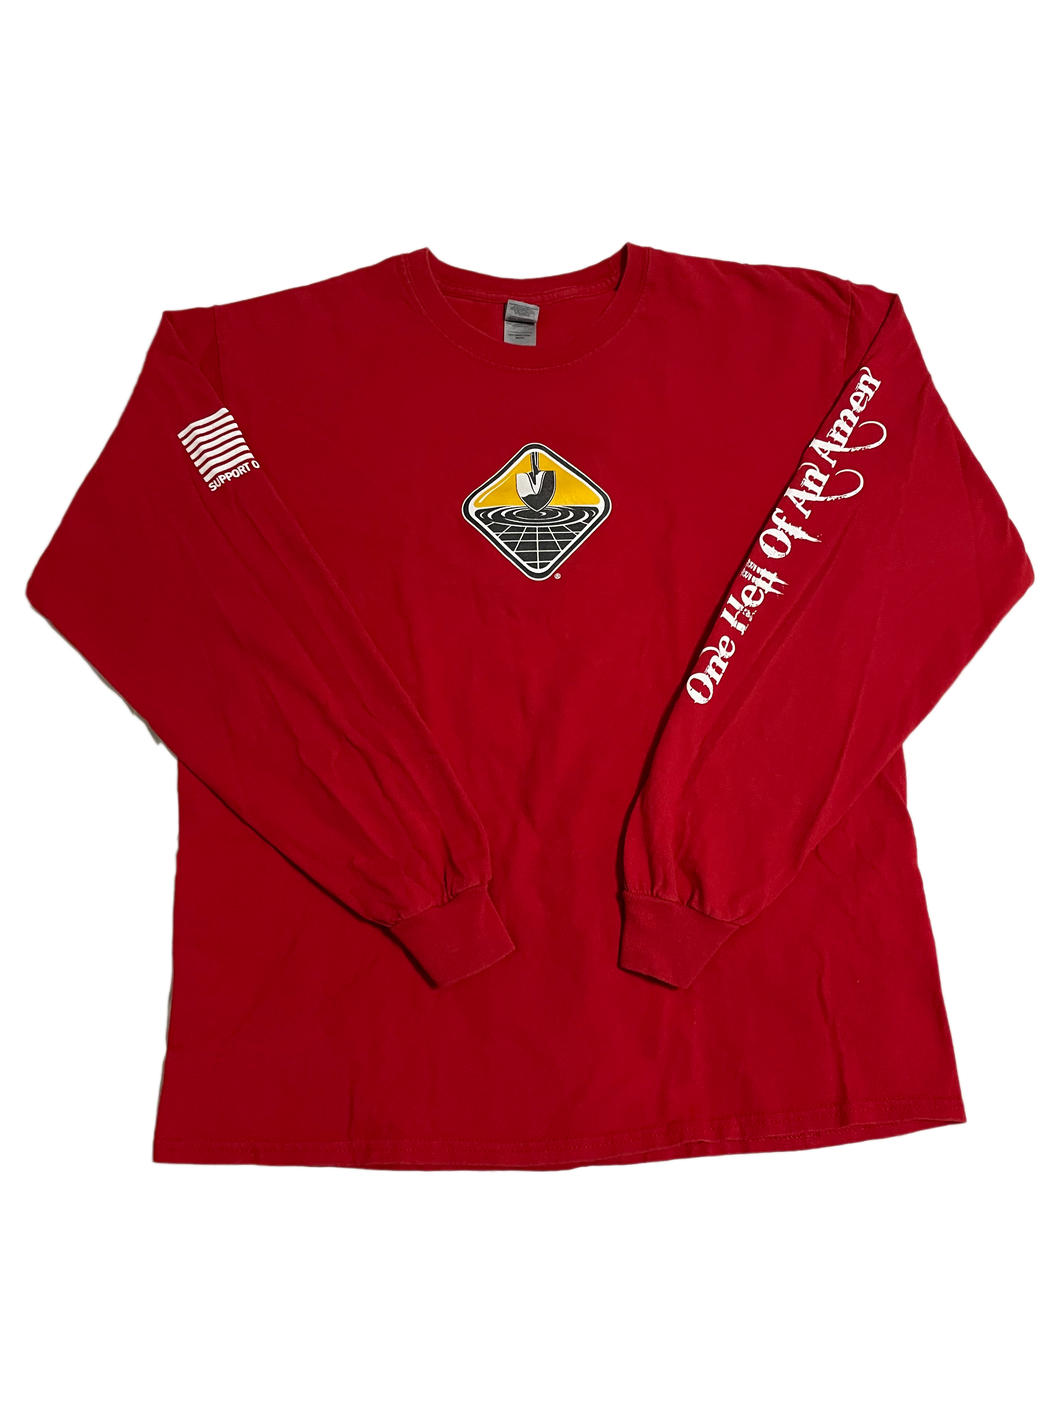 The Pond Digger Red Long Sleeve